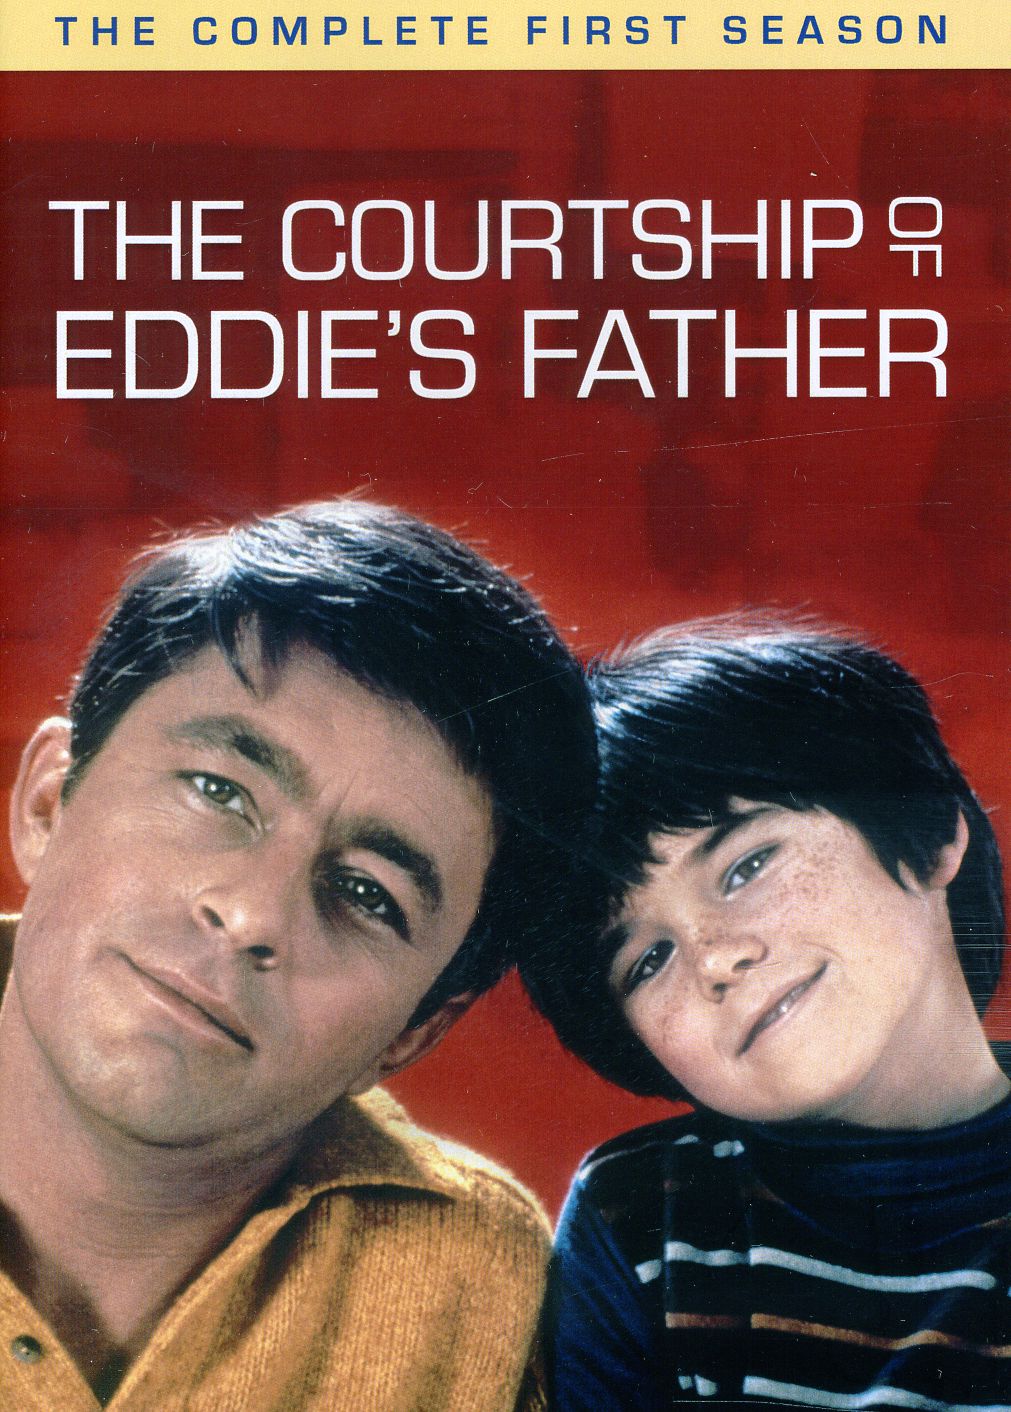 COURTSHIP OF EDDIE'S FATHER: COMPLETE FIRST SEASON